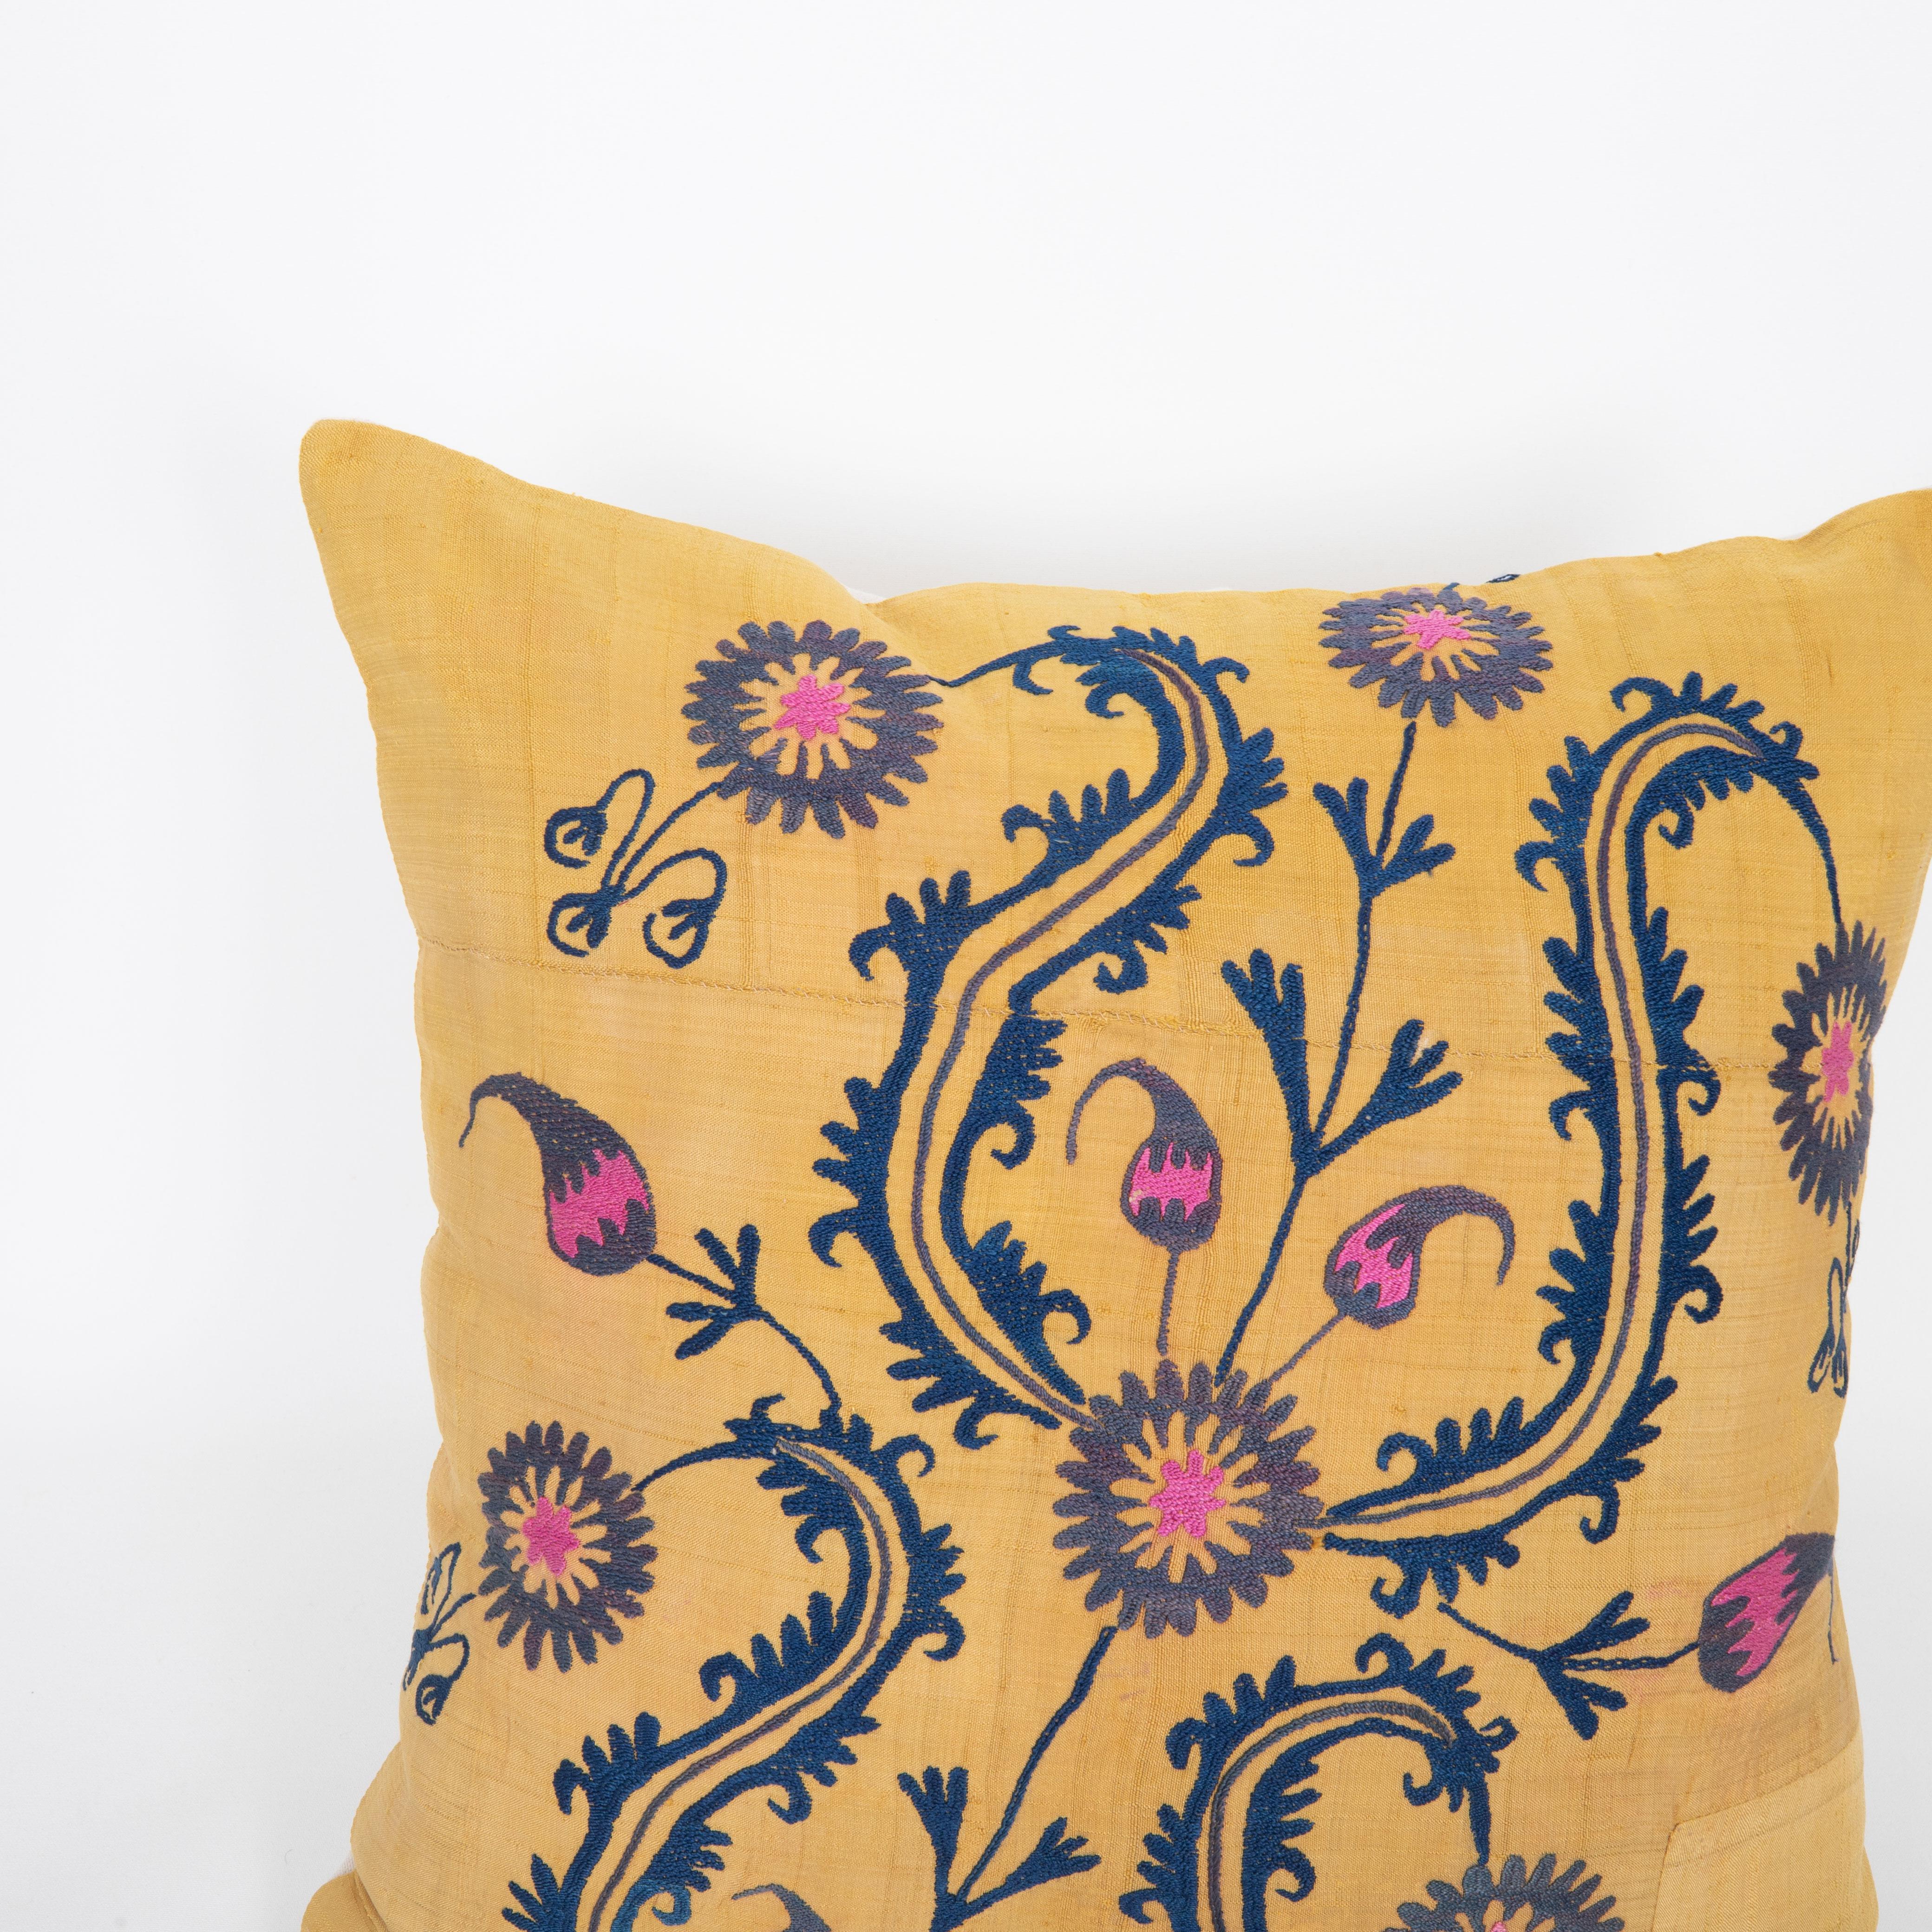 Embroidered Pillow Case Made from an Old Uzbek Silk Suzani For Sale